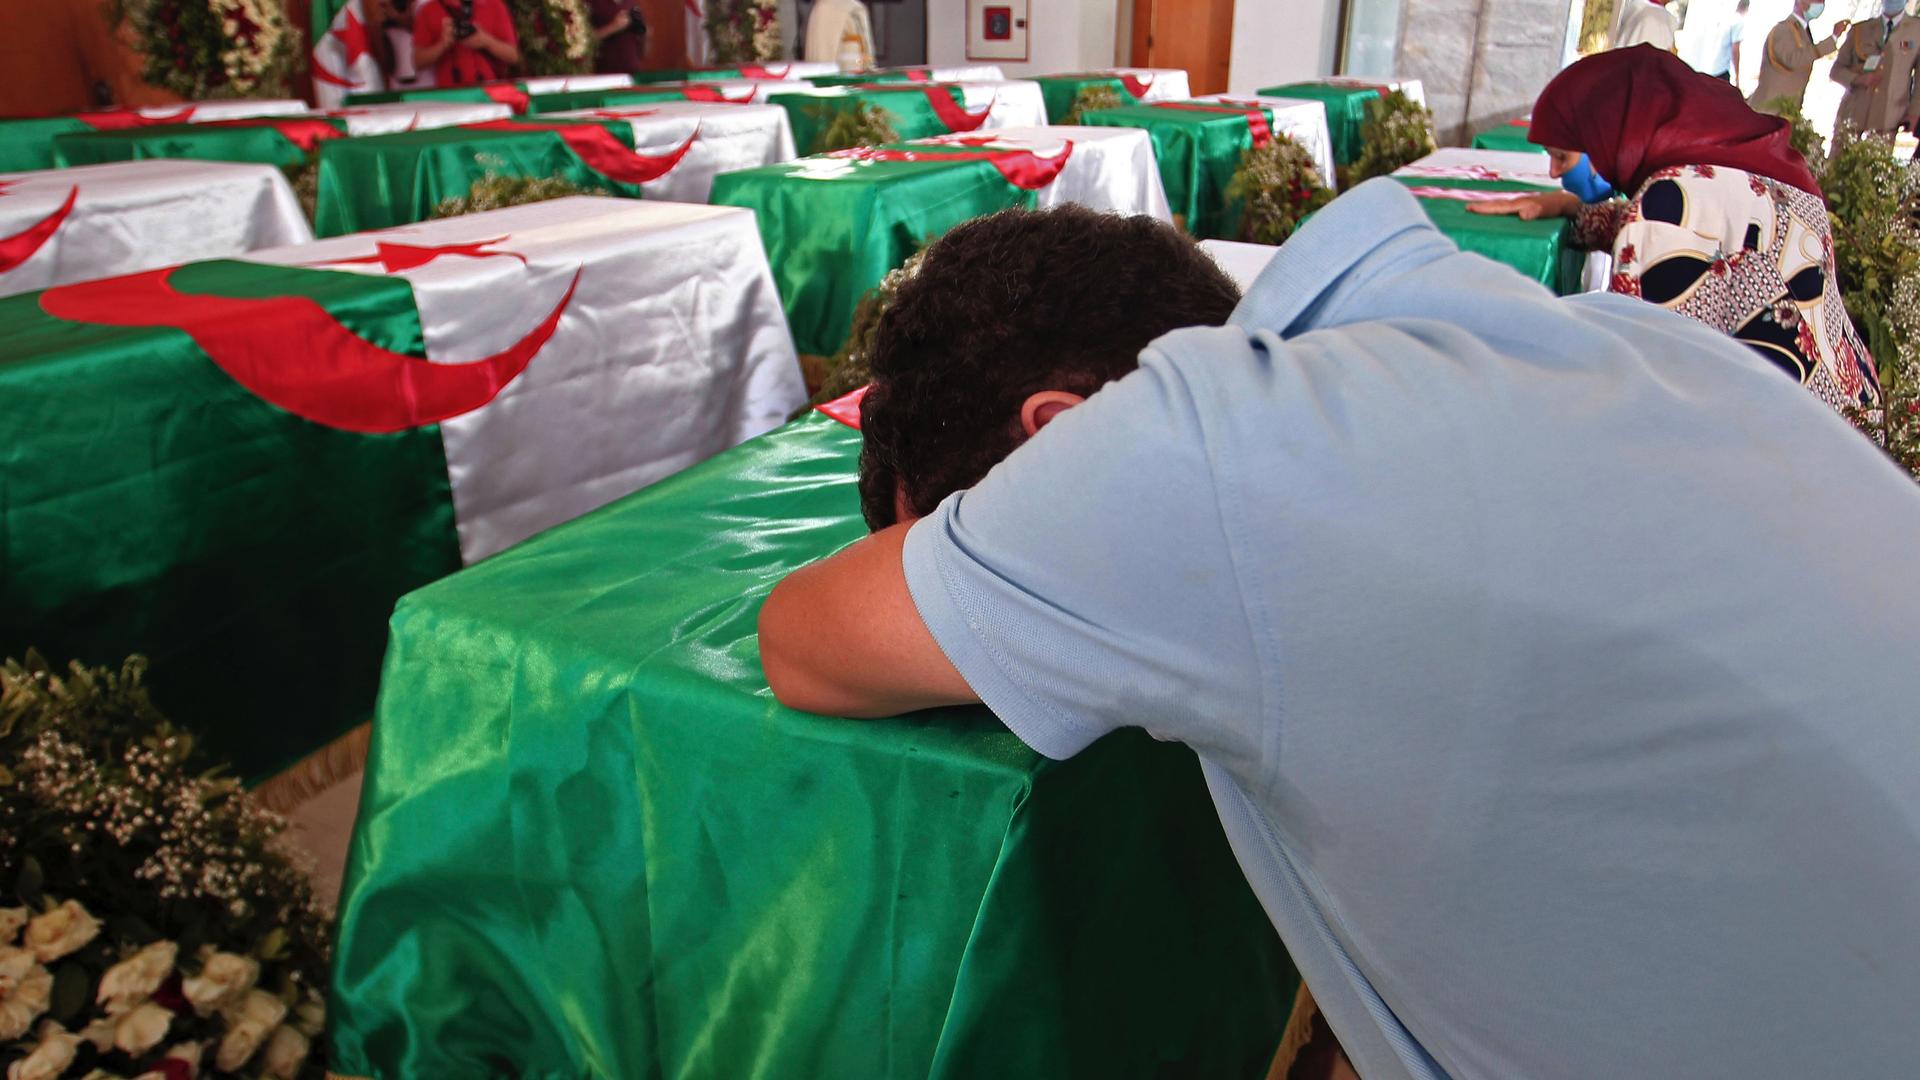 A man wearing a blue shirt leans his body over a coffin draped with the Algerian flag in a room full of coffins. 